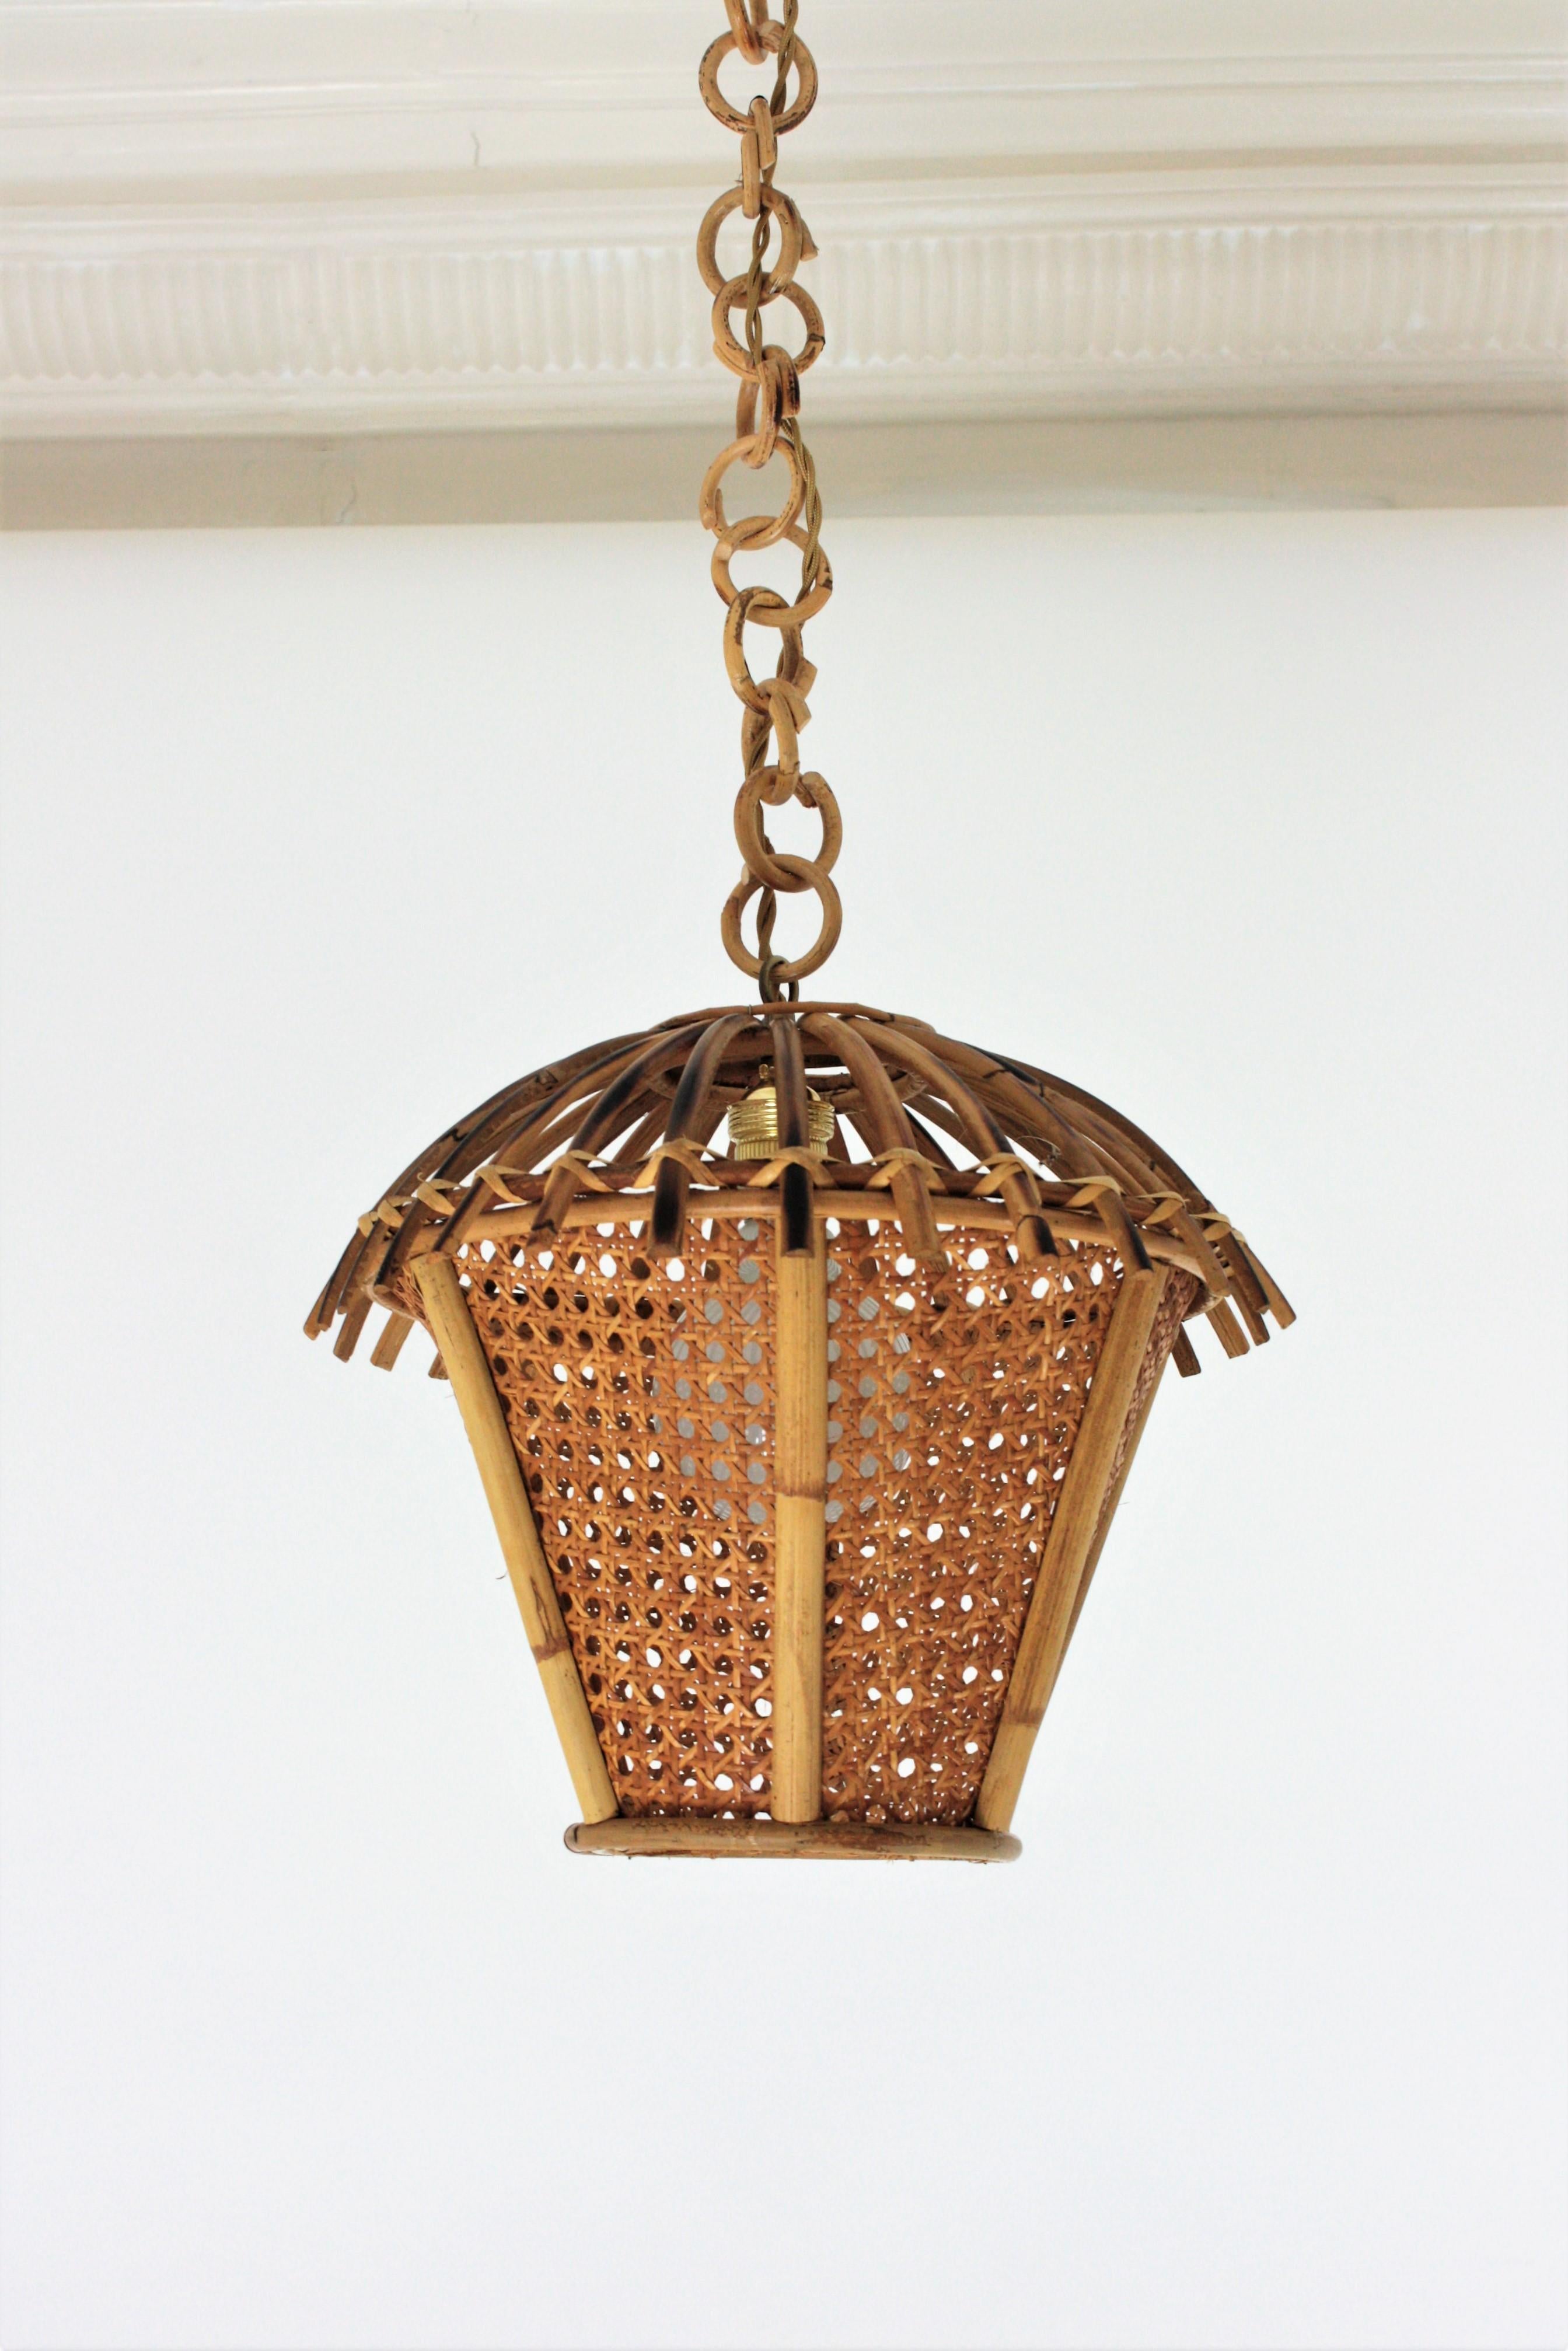 20th Century Italian Modernist Rattan and Wicker Wire Pagoda Pendant or Hanging Light, 1960s For Sale